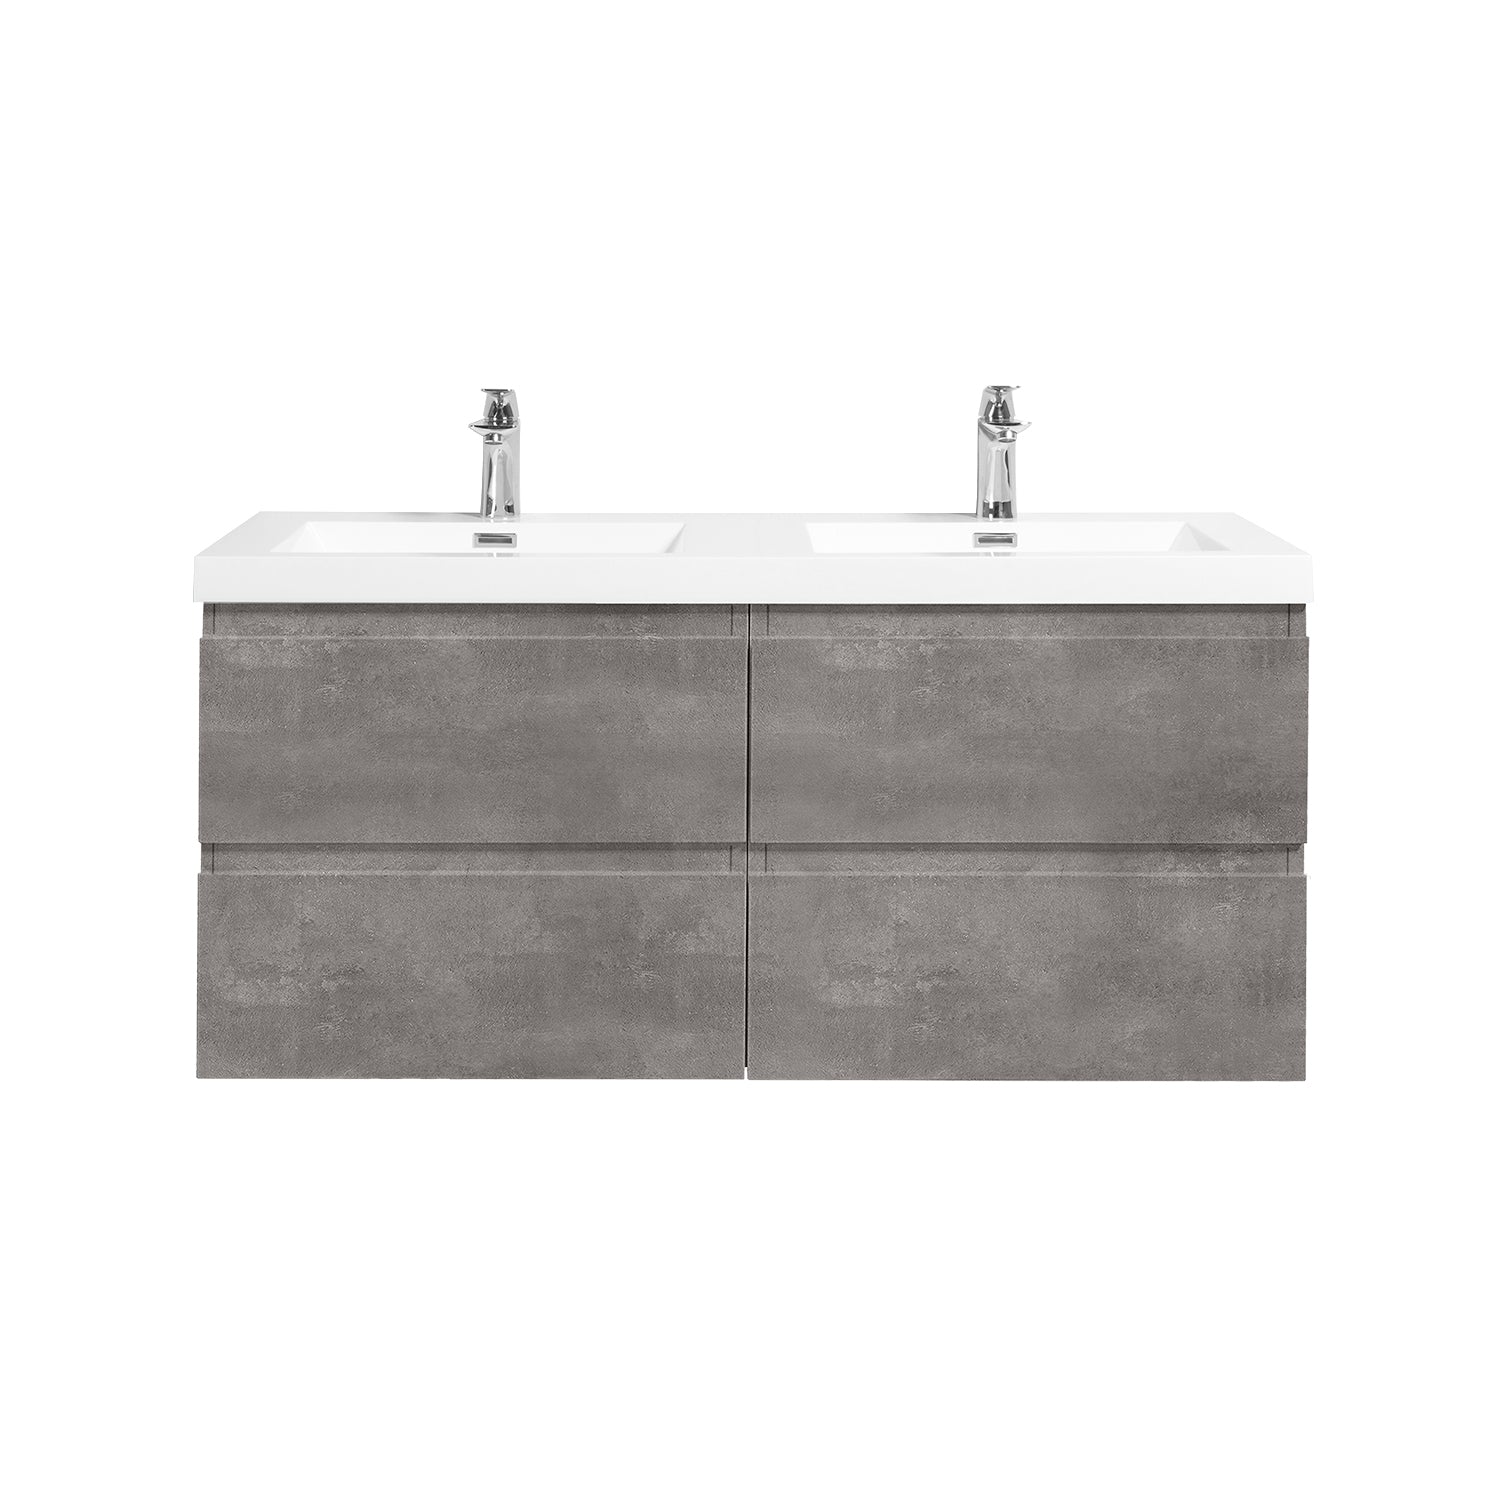 Sinber 48" Wall Mounted Double Rectangular Sink Bathroom Vanity Cabinet with White Acrylic Countertop 4 Drawers, Compact and Elegant with Sleek Design for Modern Bathrooms